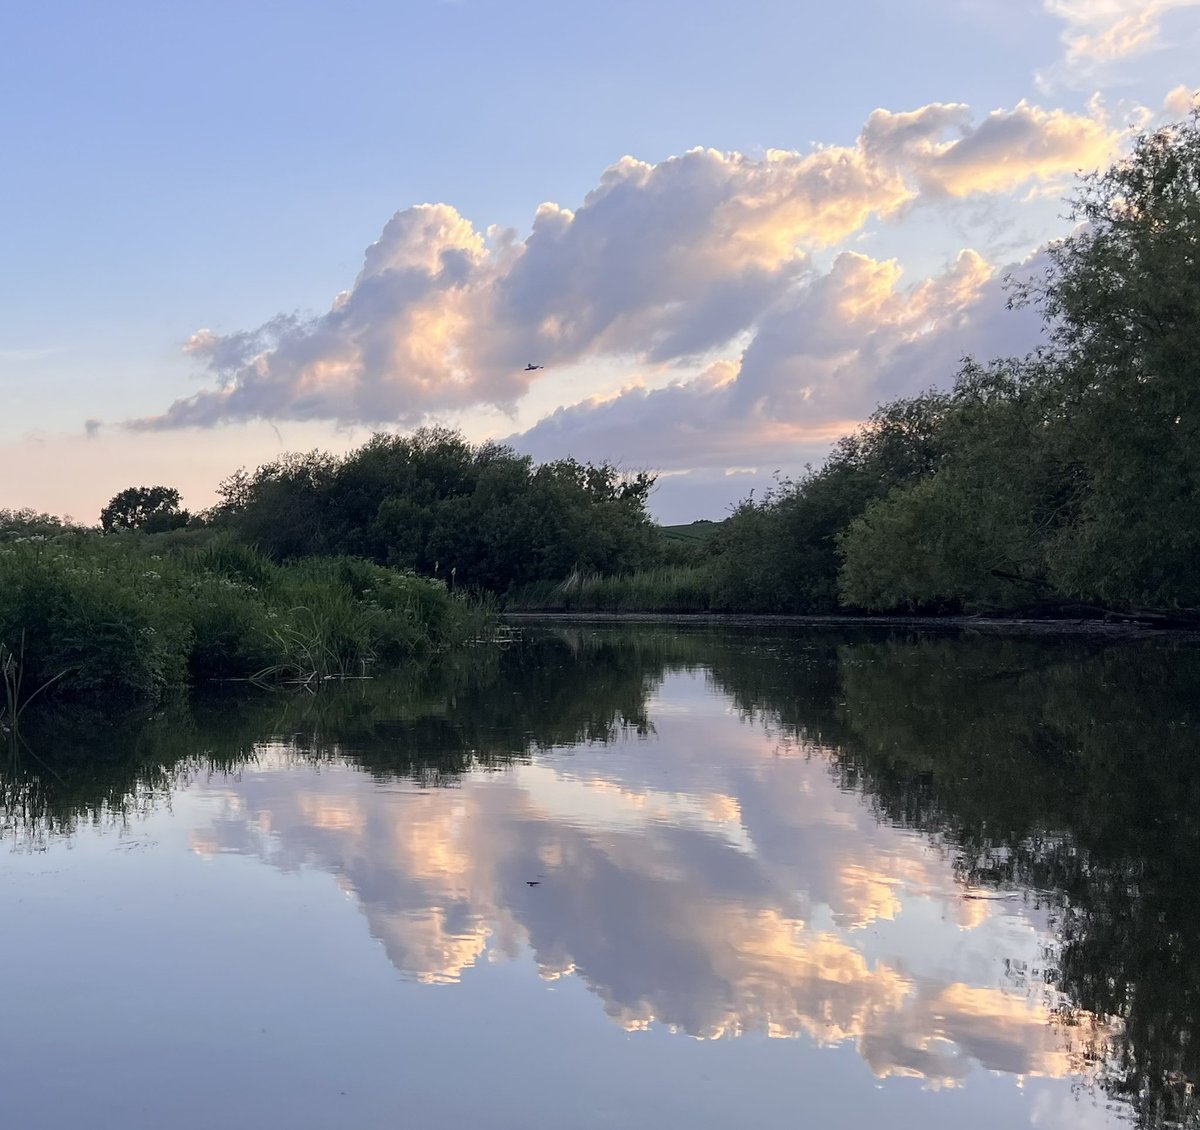 Beautiful evening on the River Stour in Kent. Spotted at least 6 🦫.